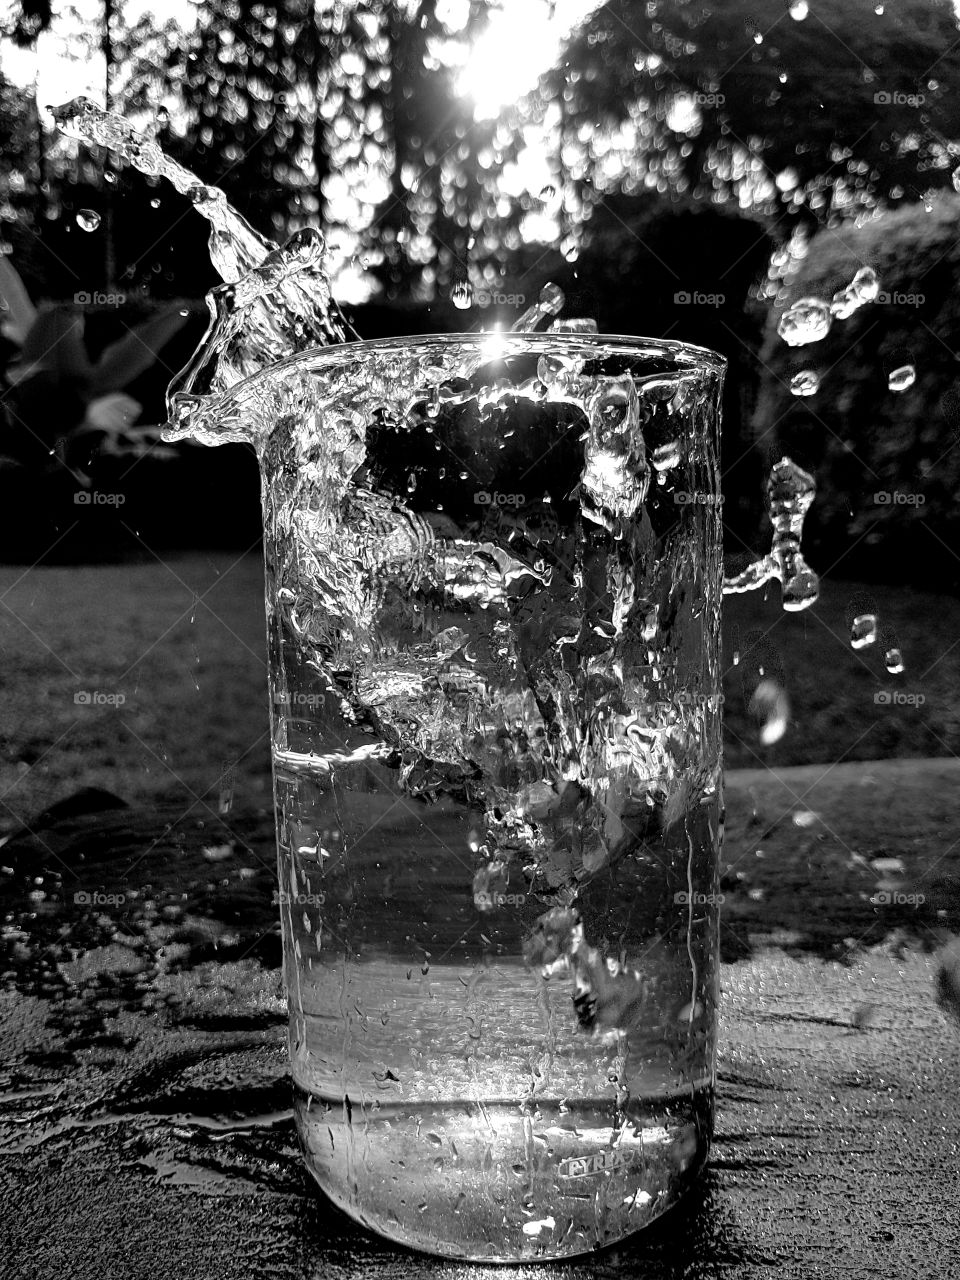 Fun at home. My kids and i were playing with water and creating vibrations when i captured this.